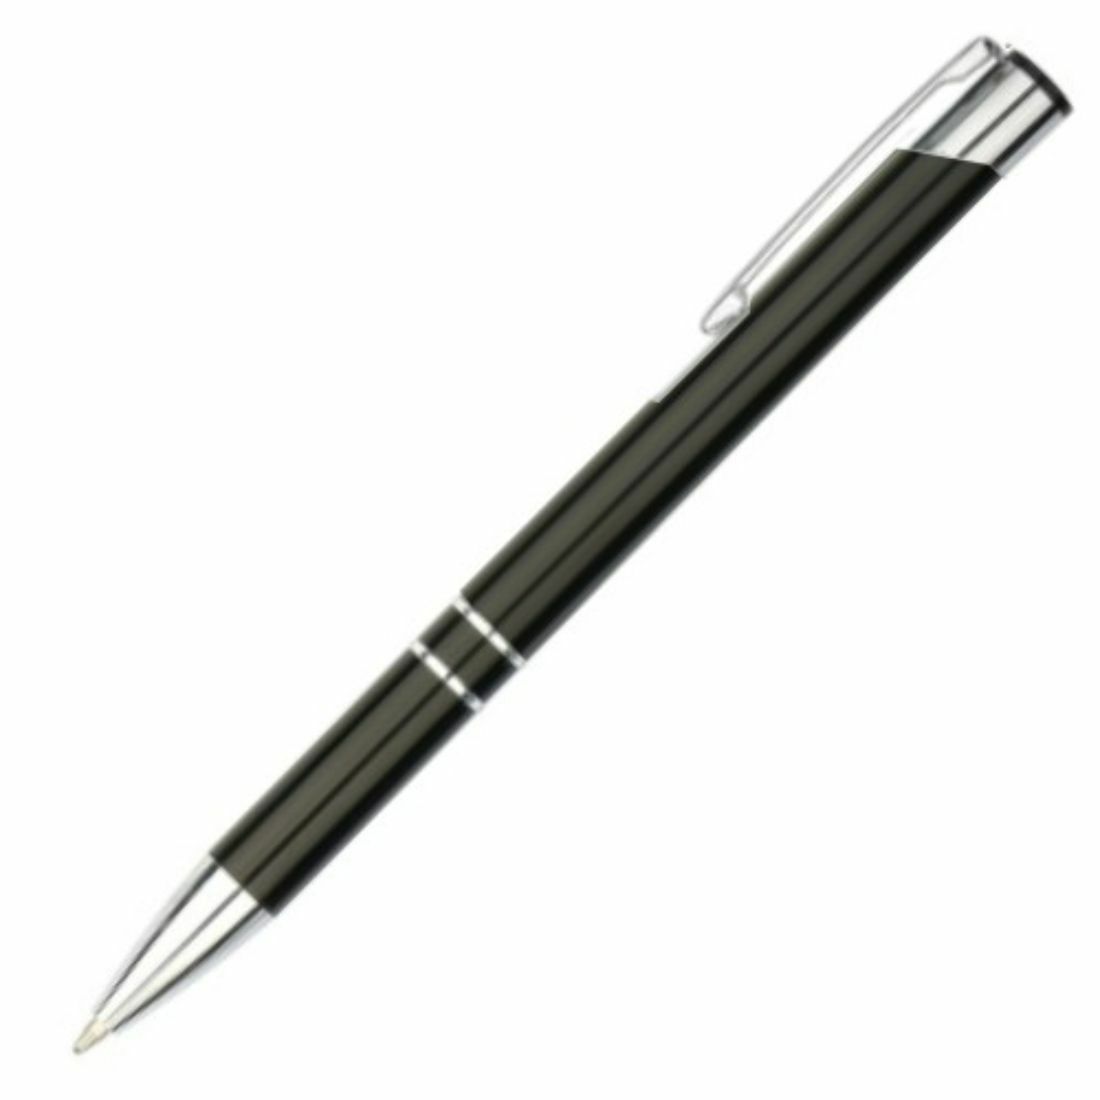 Buy in Bulk 250 x Premium Quality Metal Madison Pens Wholesale Fast Delivery